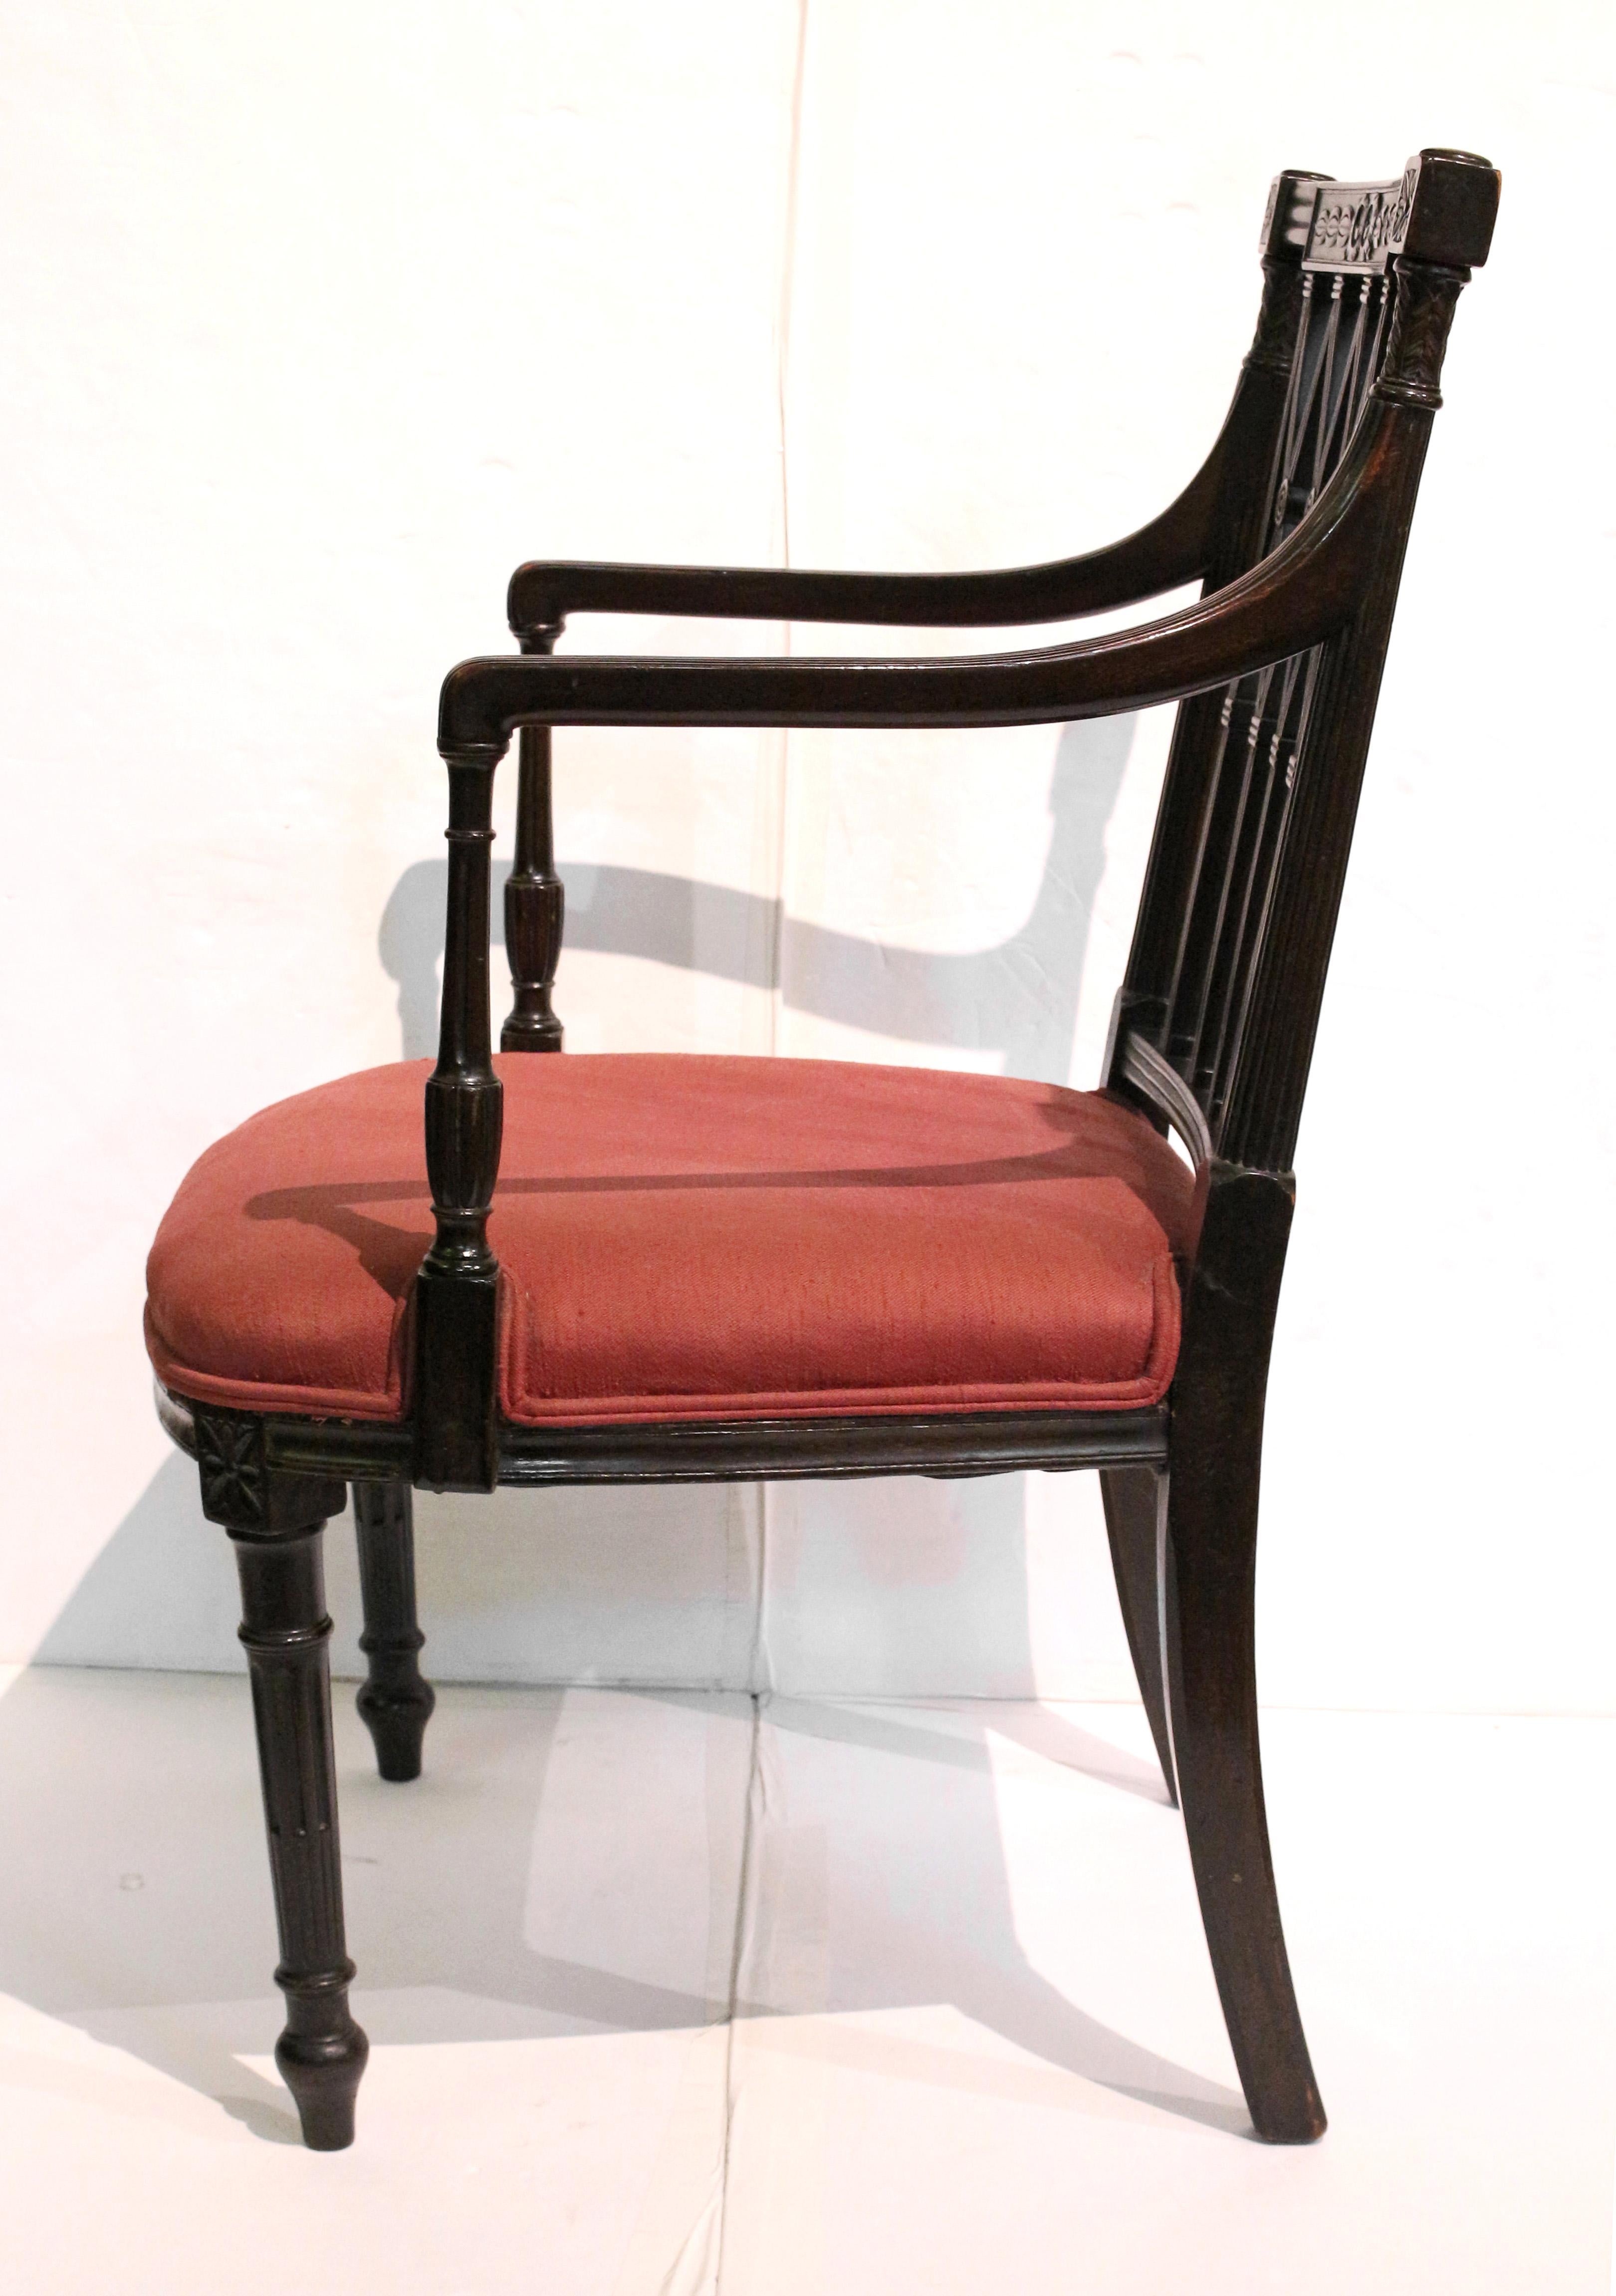 Upholstery Pair of Mid-19th Century Classical English Arm Chairs